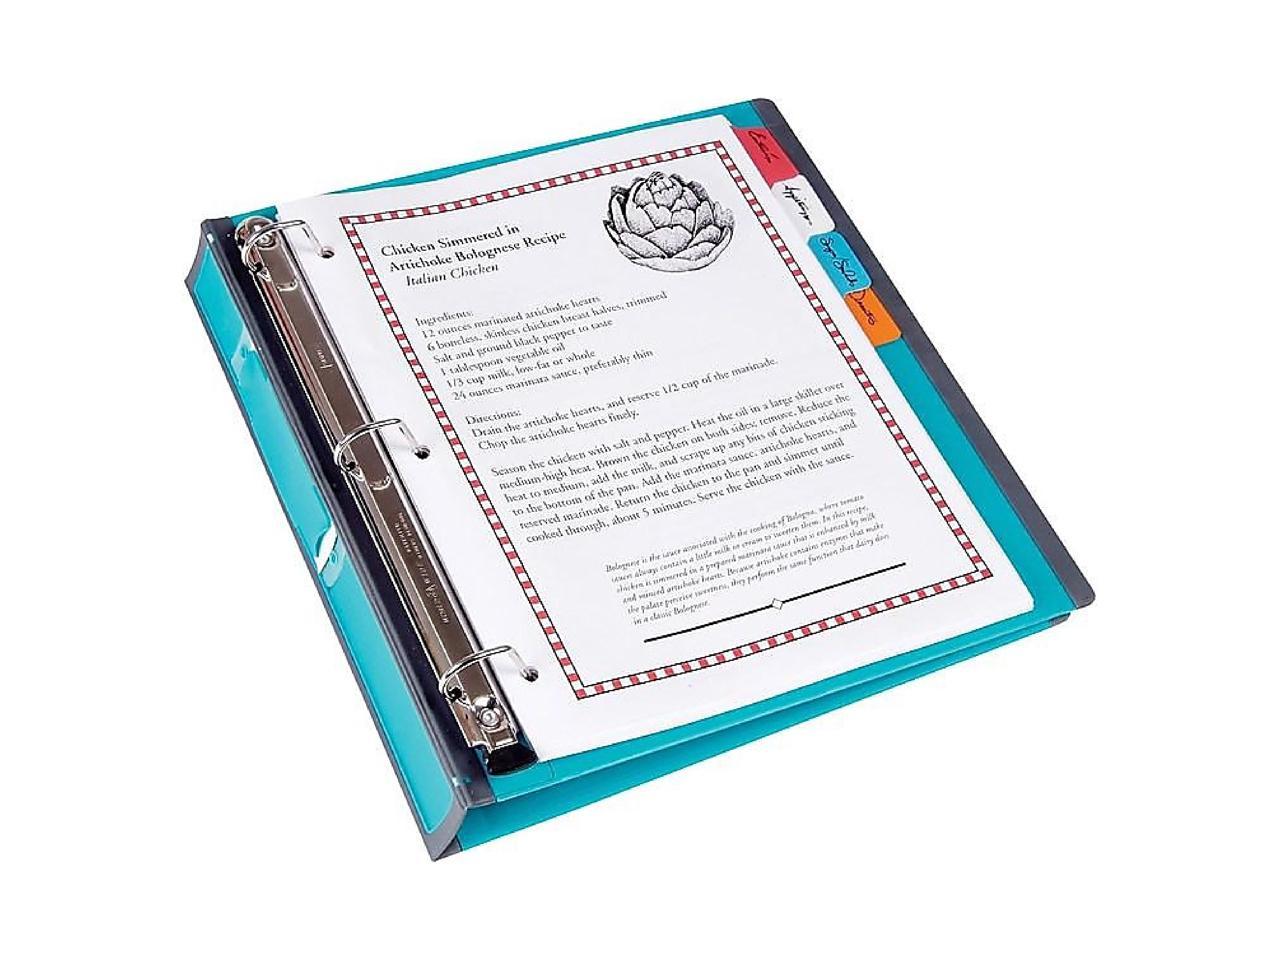 Staples Better 1-Inch D 3-Ring View Binder Teal 651740 13466-CC 